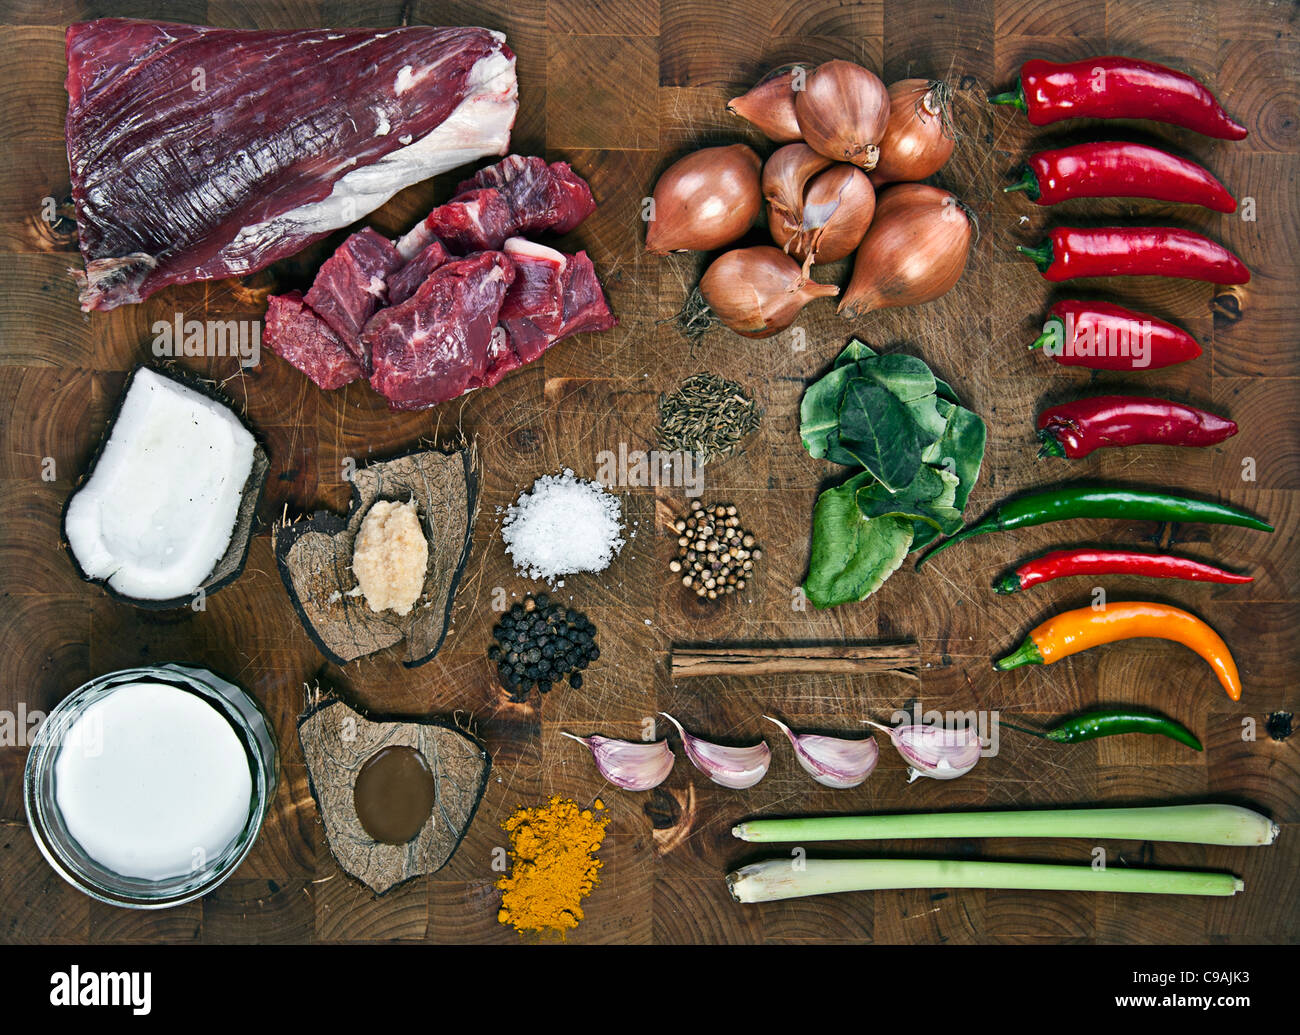 Raw Ingredients for Beef Curry on Wooden Chopping Board Stock Photo